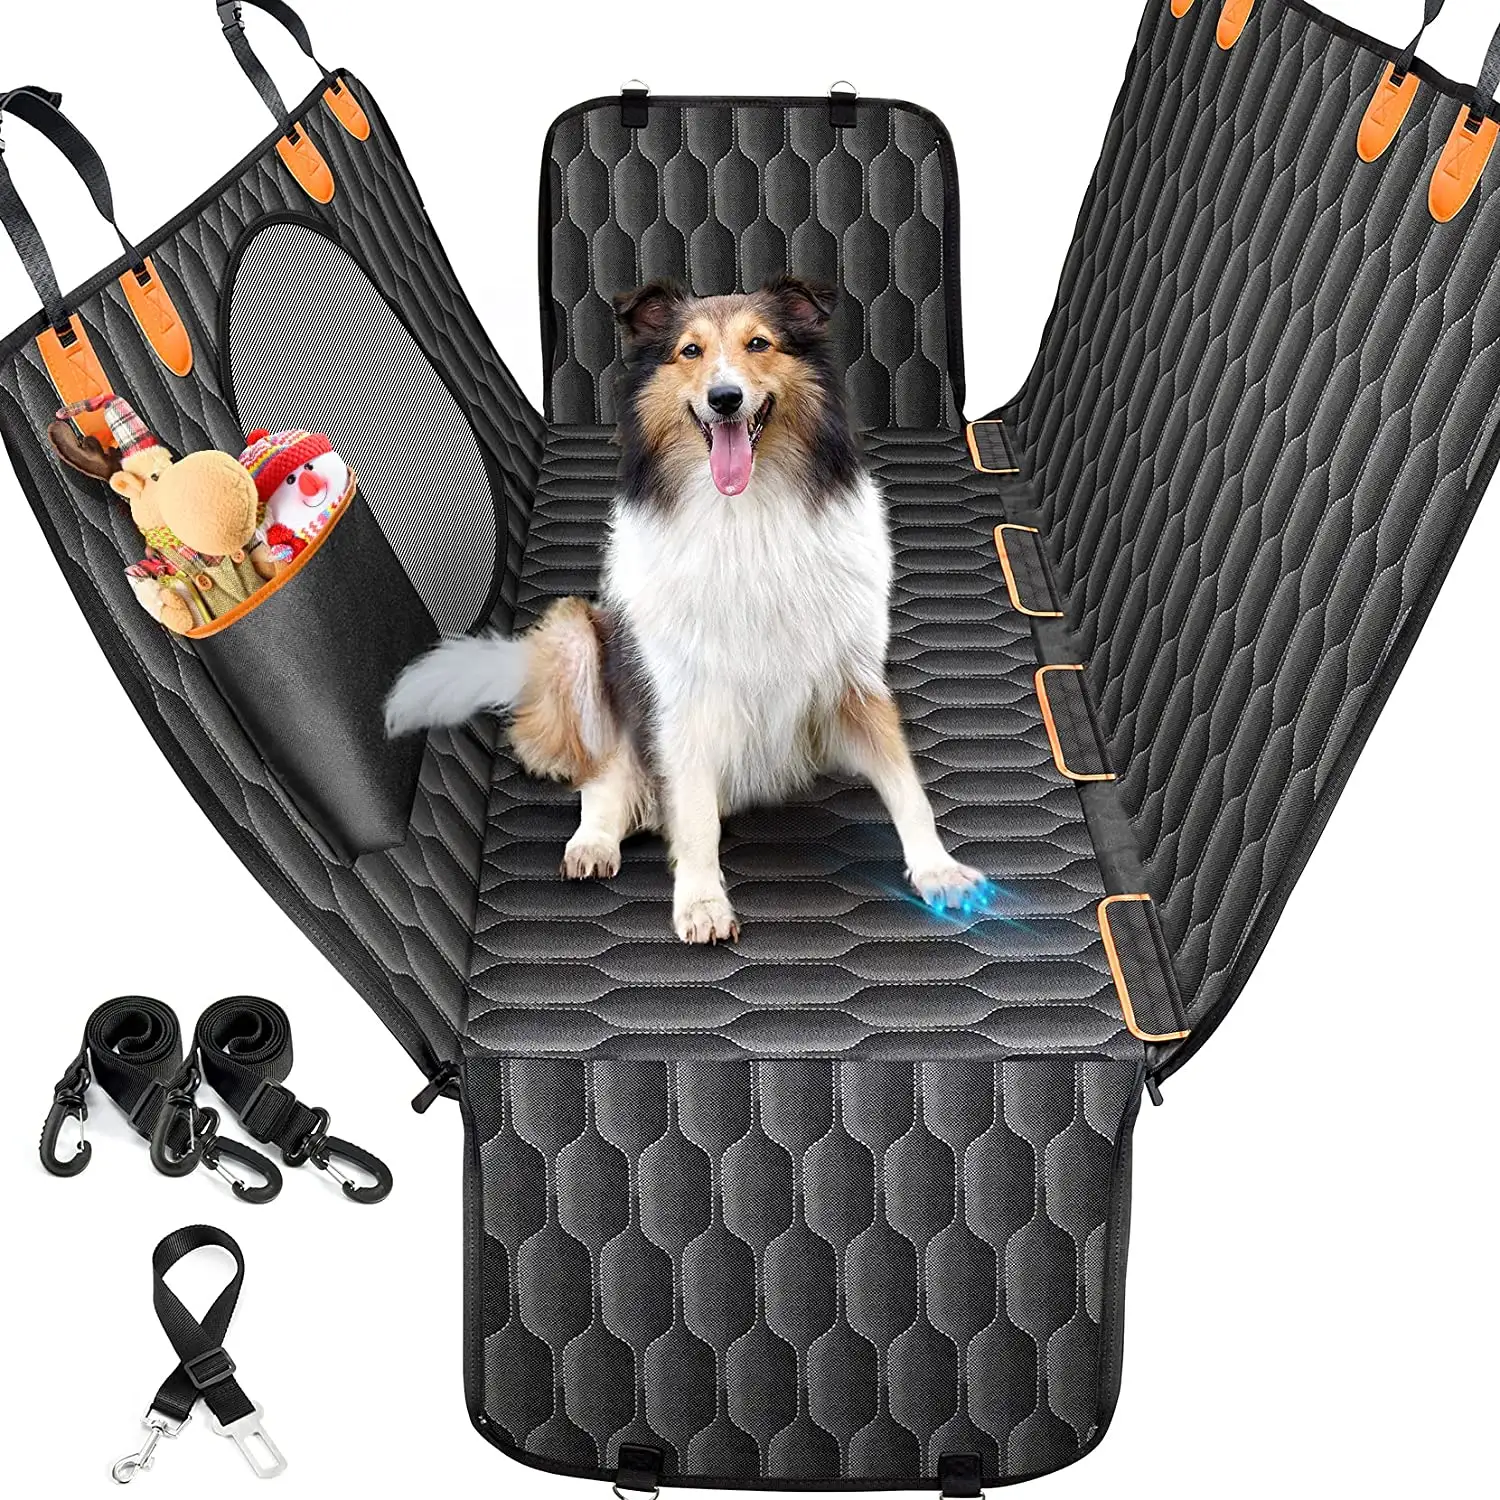 Dog Car Seat Cover for Back Seat, 600D Nonslip Back Seat Cover with Mesh Window and Storage Pocket for Cars Trucks and SUV